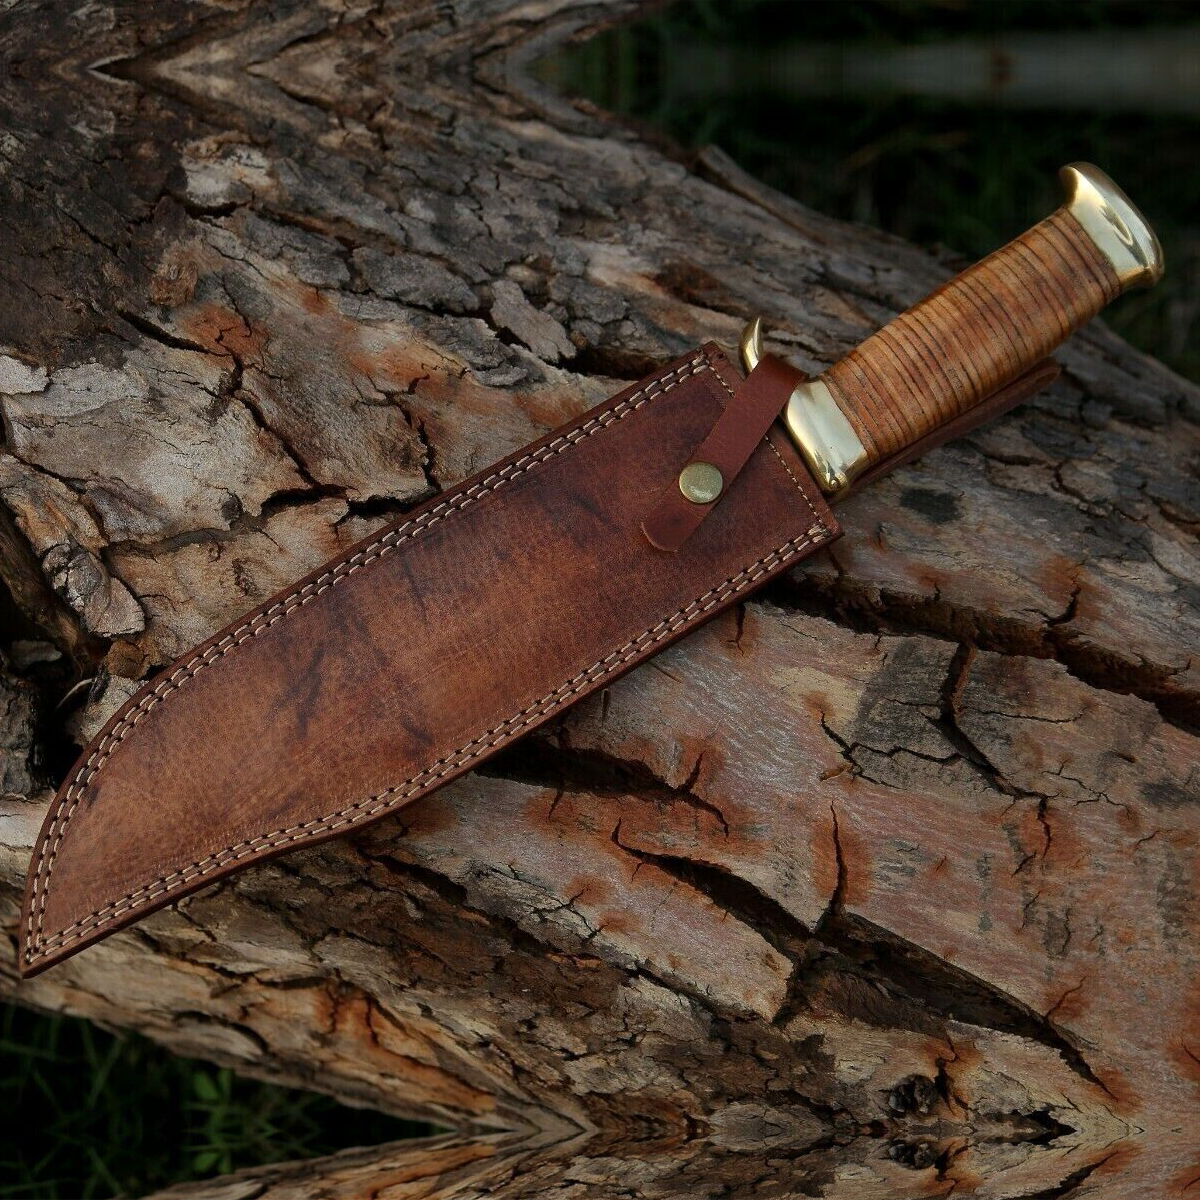 Handmade Bowie Long Hunting Knife Stainless Steel  Knife, Fixed Blade Hunting Knife, Outdoor Camping Knife, Survival Knife, Large Bowie Knife With Leather Sheath